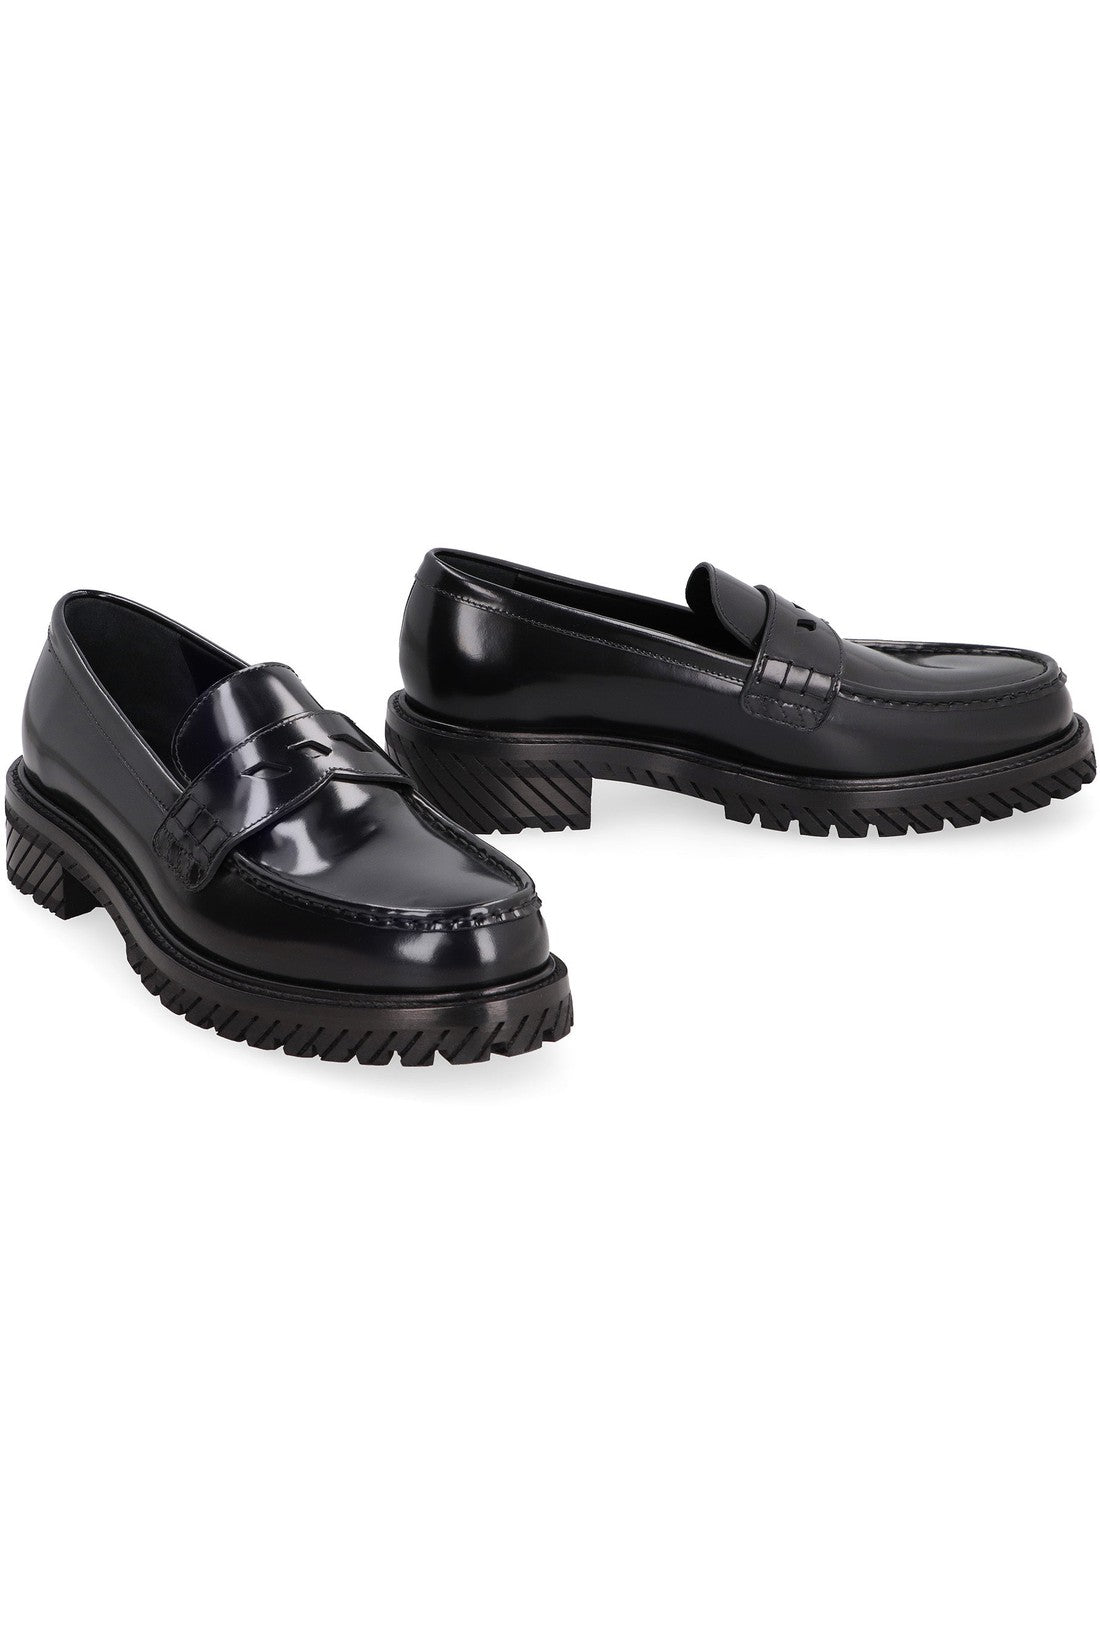 Off-White-OUTLET-SALE-Combat leather loafers-ARCHIVIST